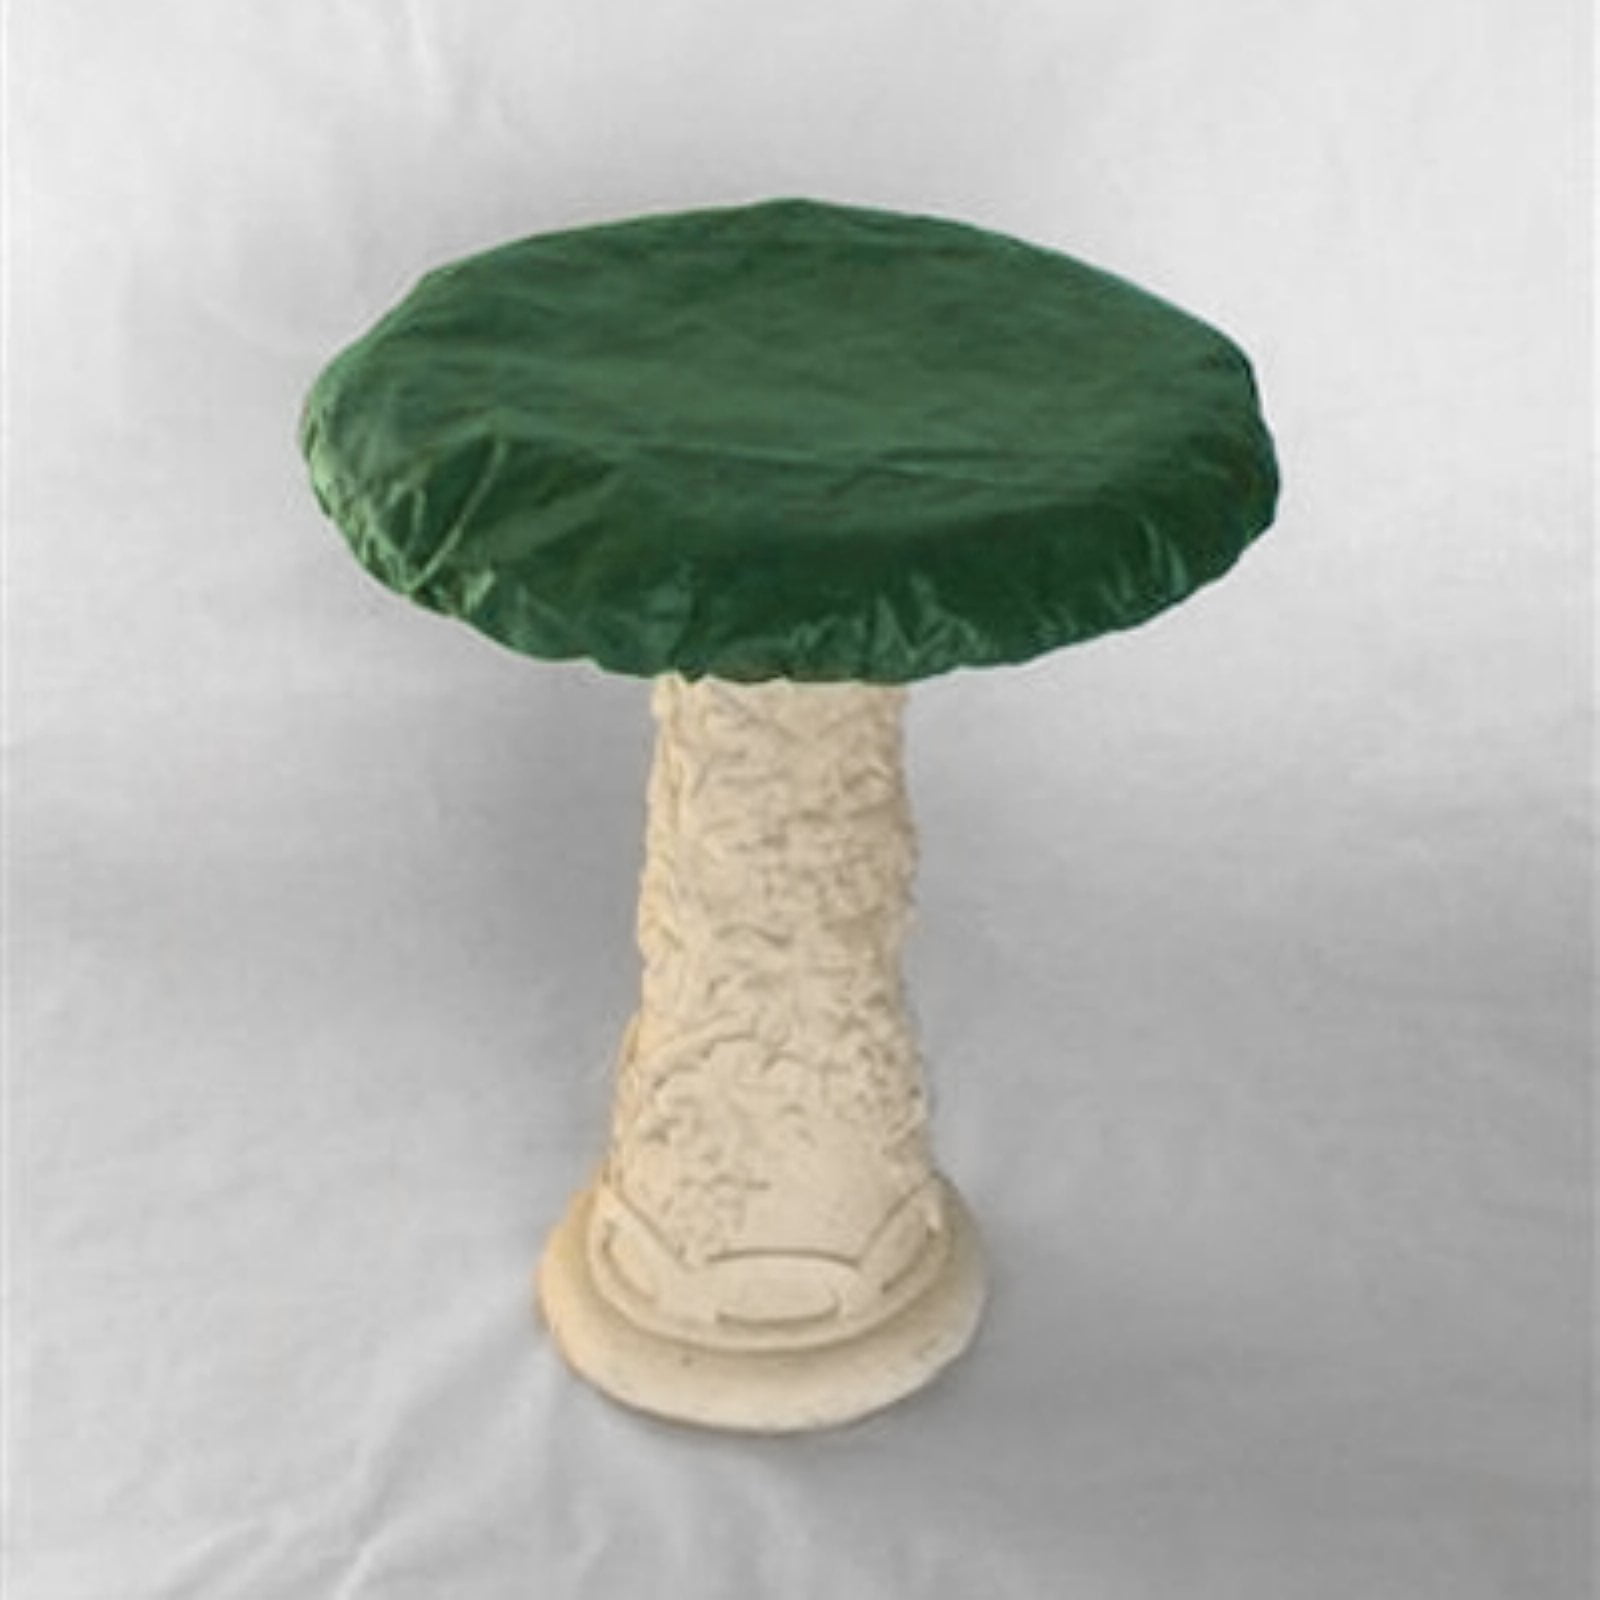 Green Bosmere Waterproof Bird Bath Cover for 18 to 21 Diameter Bowl